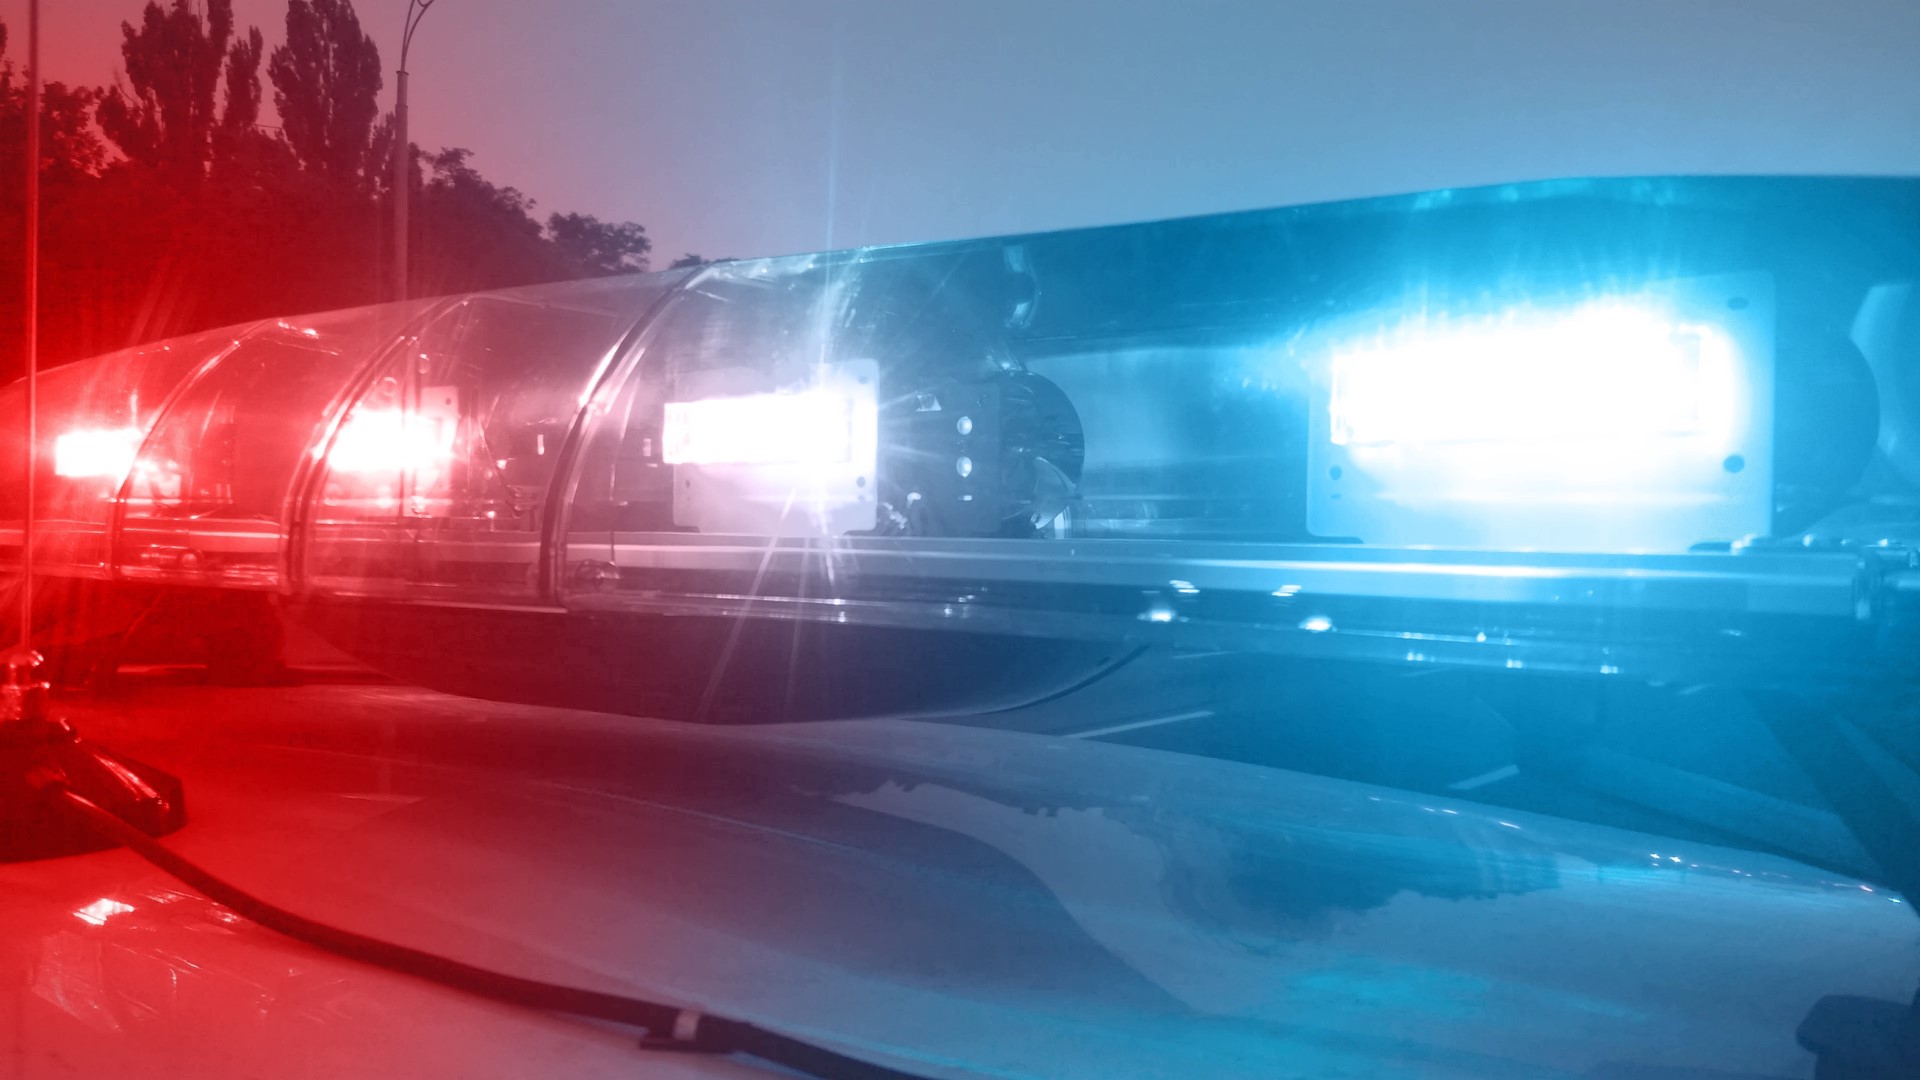 Indiana Conservation Officers said they responded to an off-road vehicle (ORV) crash on North 600 West just after 5 p.m. Saturday.